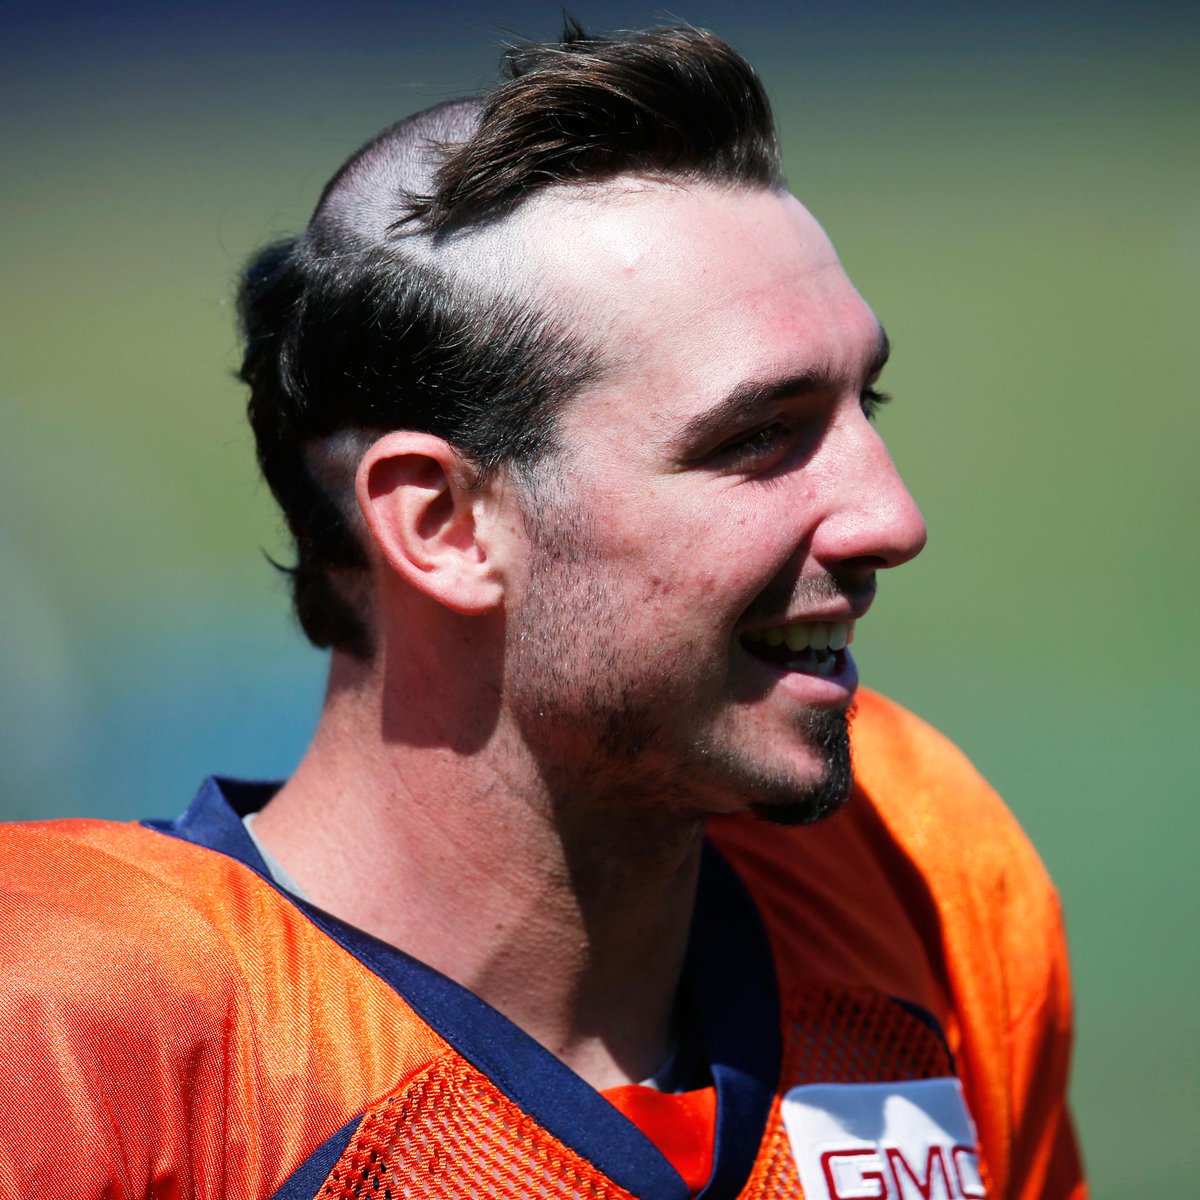 Broncos veterans give rookies hilarious haircuts